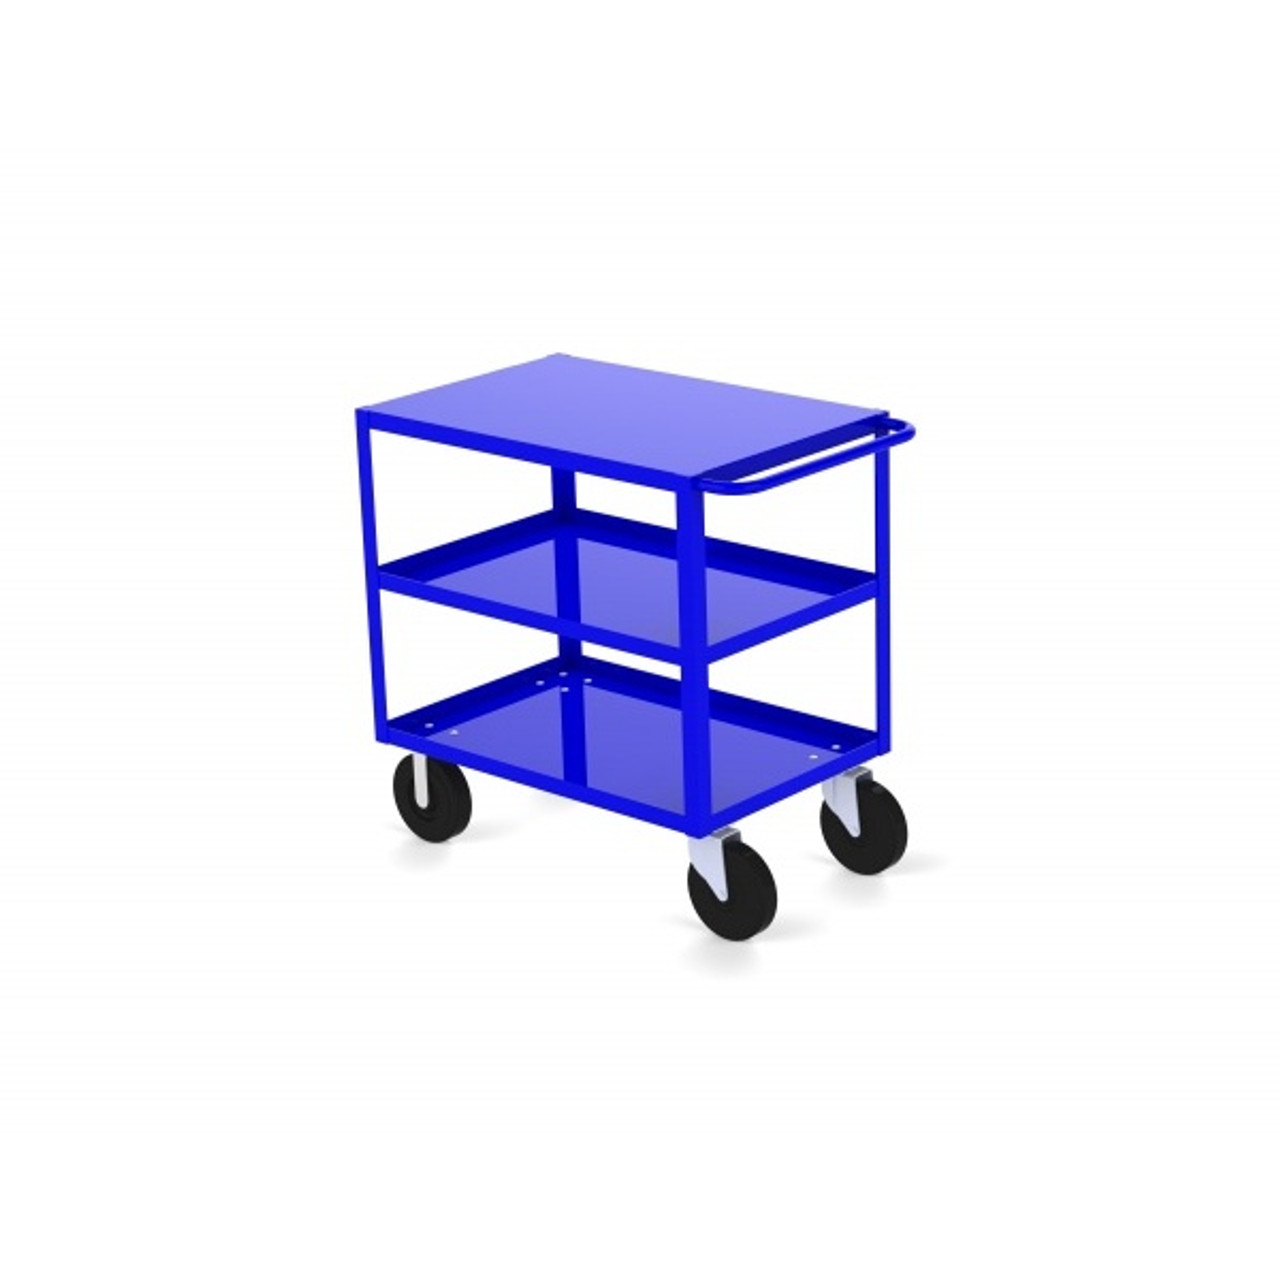 Valley Craft Three Shelf 24 x 36" Flush-Top Utility Cart, Blue with Mold On Casters (CALL FOR BEST PRICING)